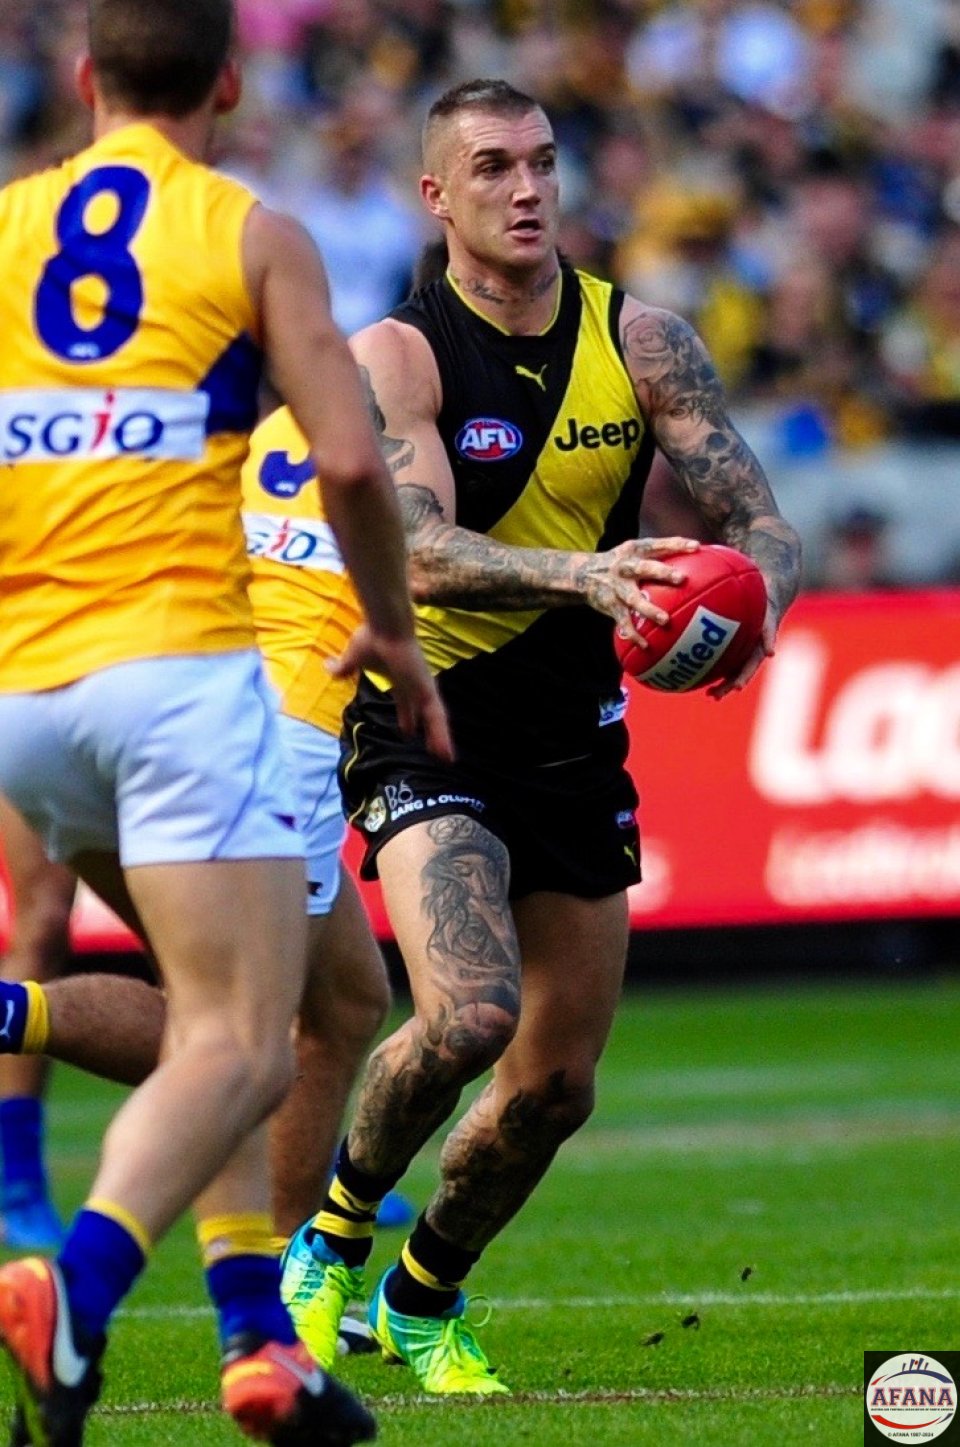 Dustin Martin setting for a the long kick as Jack Redden (8) prepares to tackle